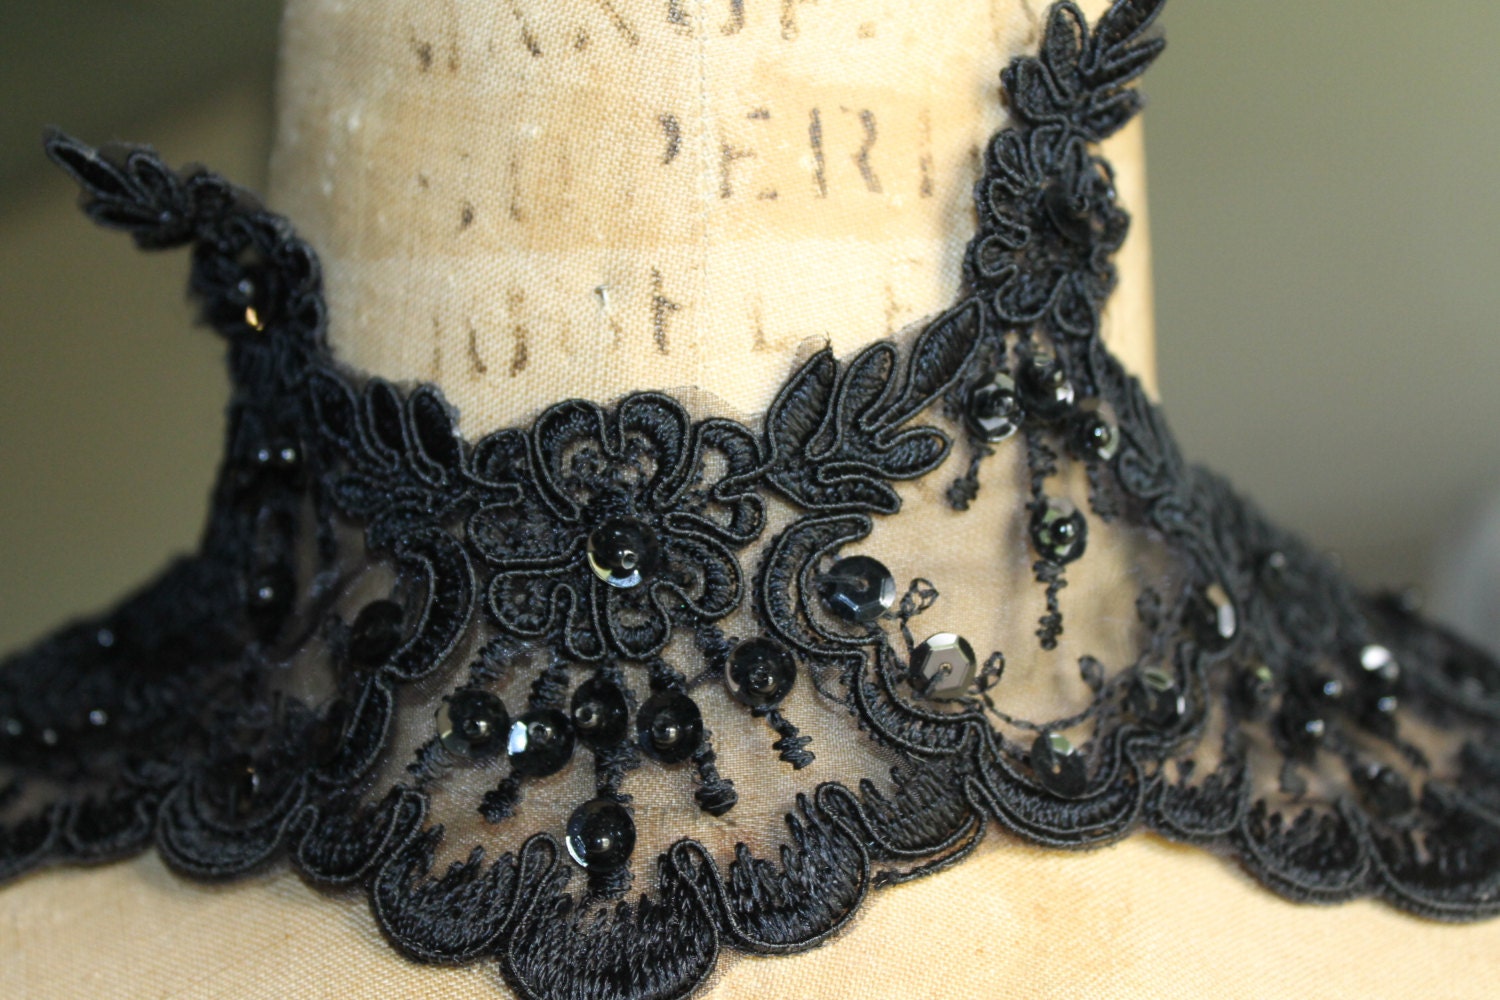 Alencon Black Beaded Lace trim with Faux Pearls. 3.5 inches